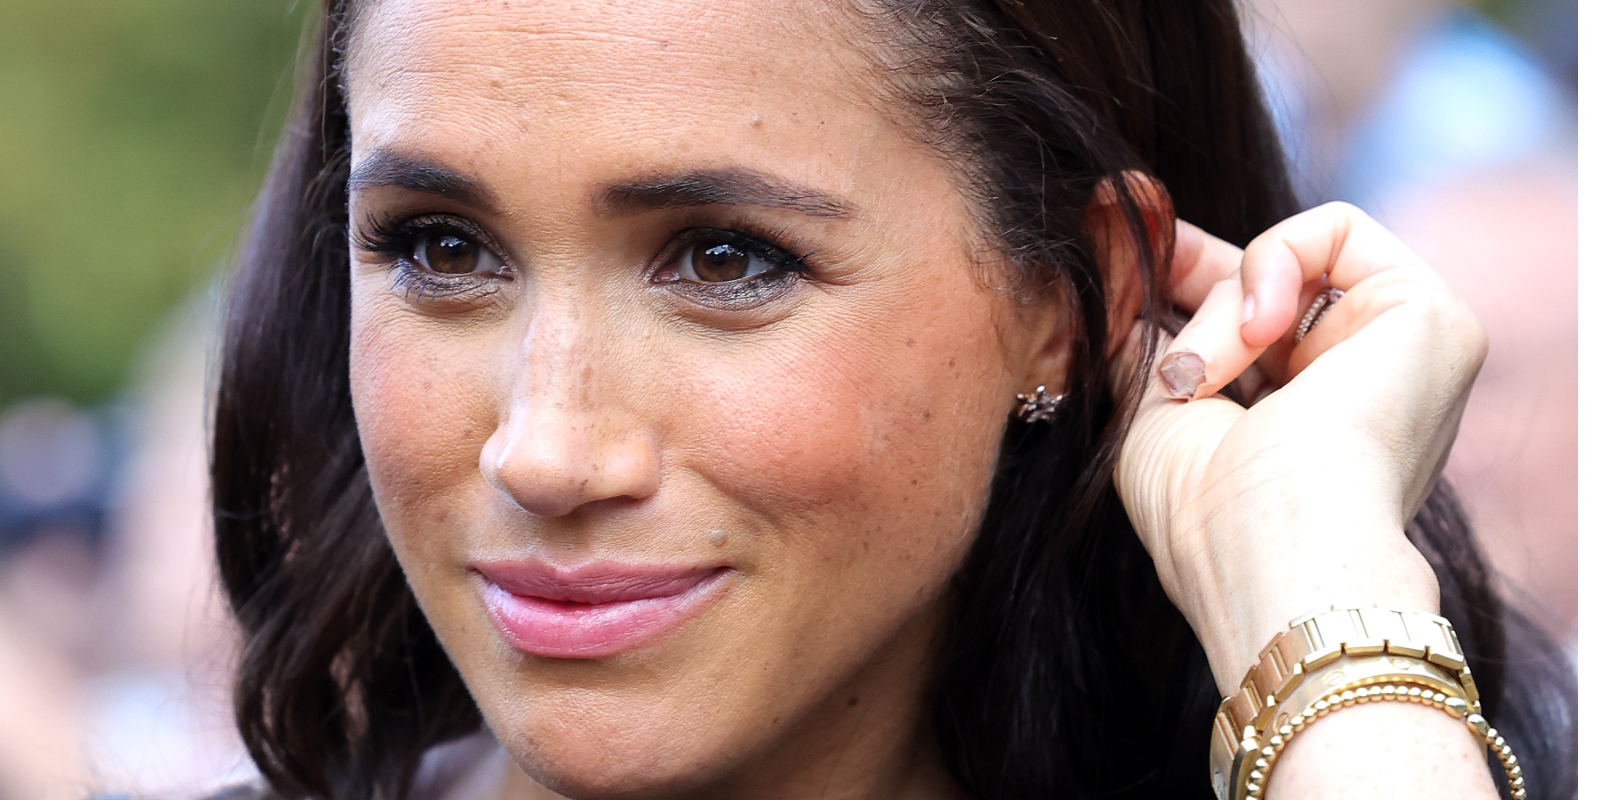 Meghan Markle touches her hair during a walkabout ahead of the funeral of Queen Elizabeth II in September 2022.